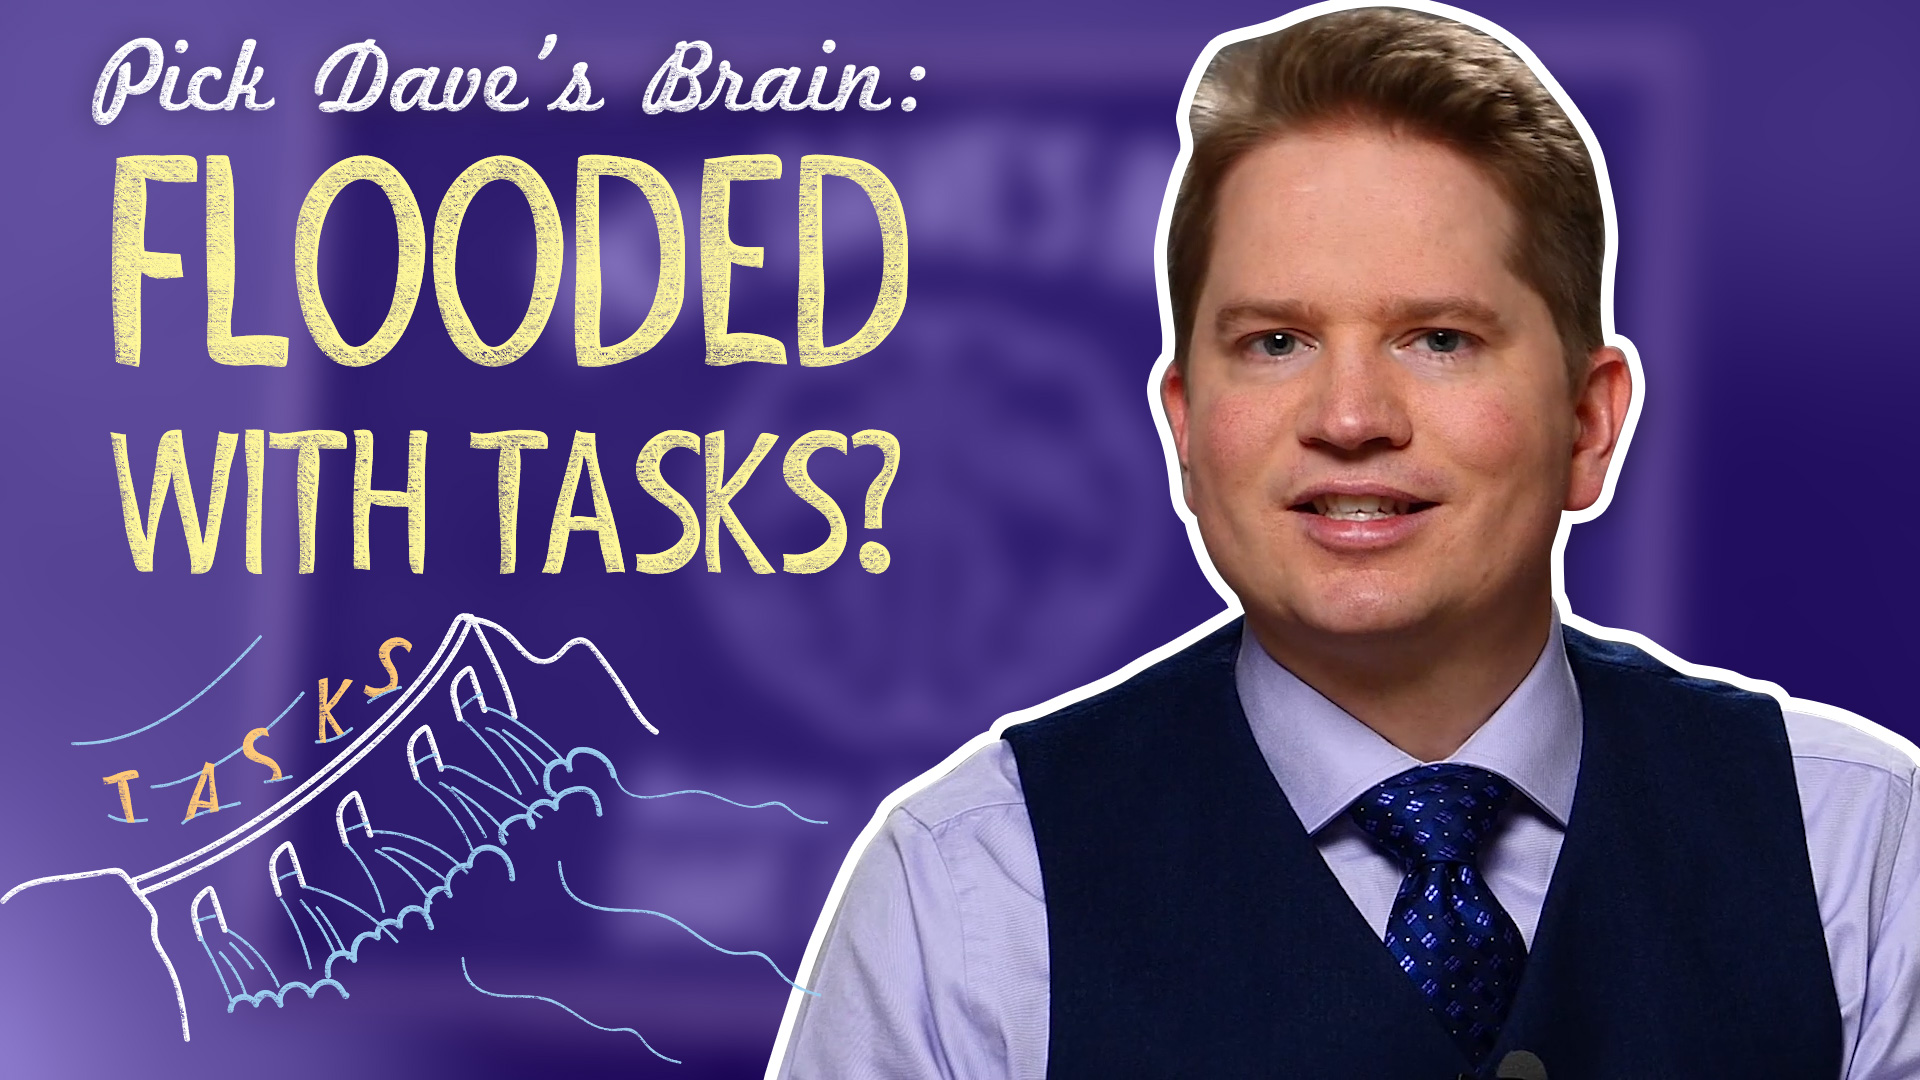 How To Get Work Done Without Stretching Yourself Thin – Pick Dave’s Brain